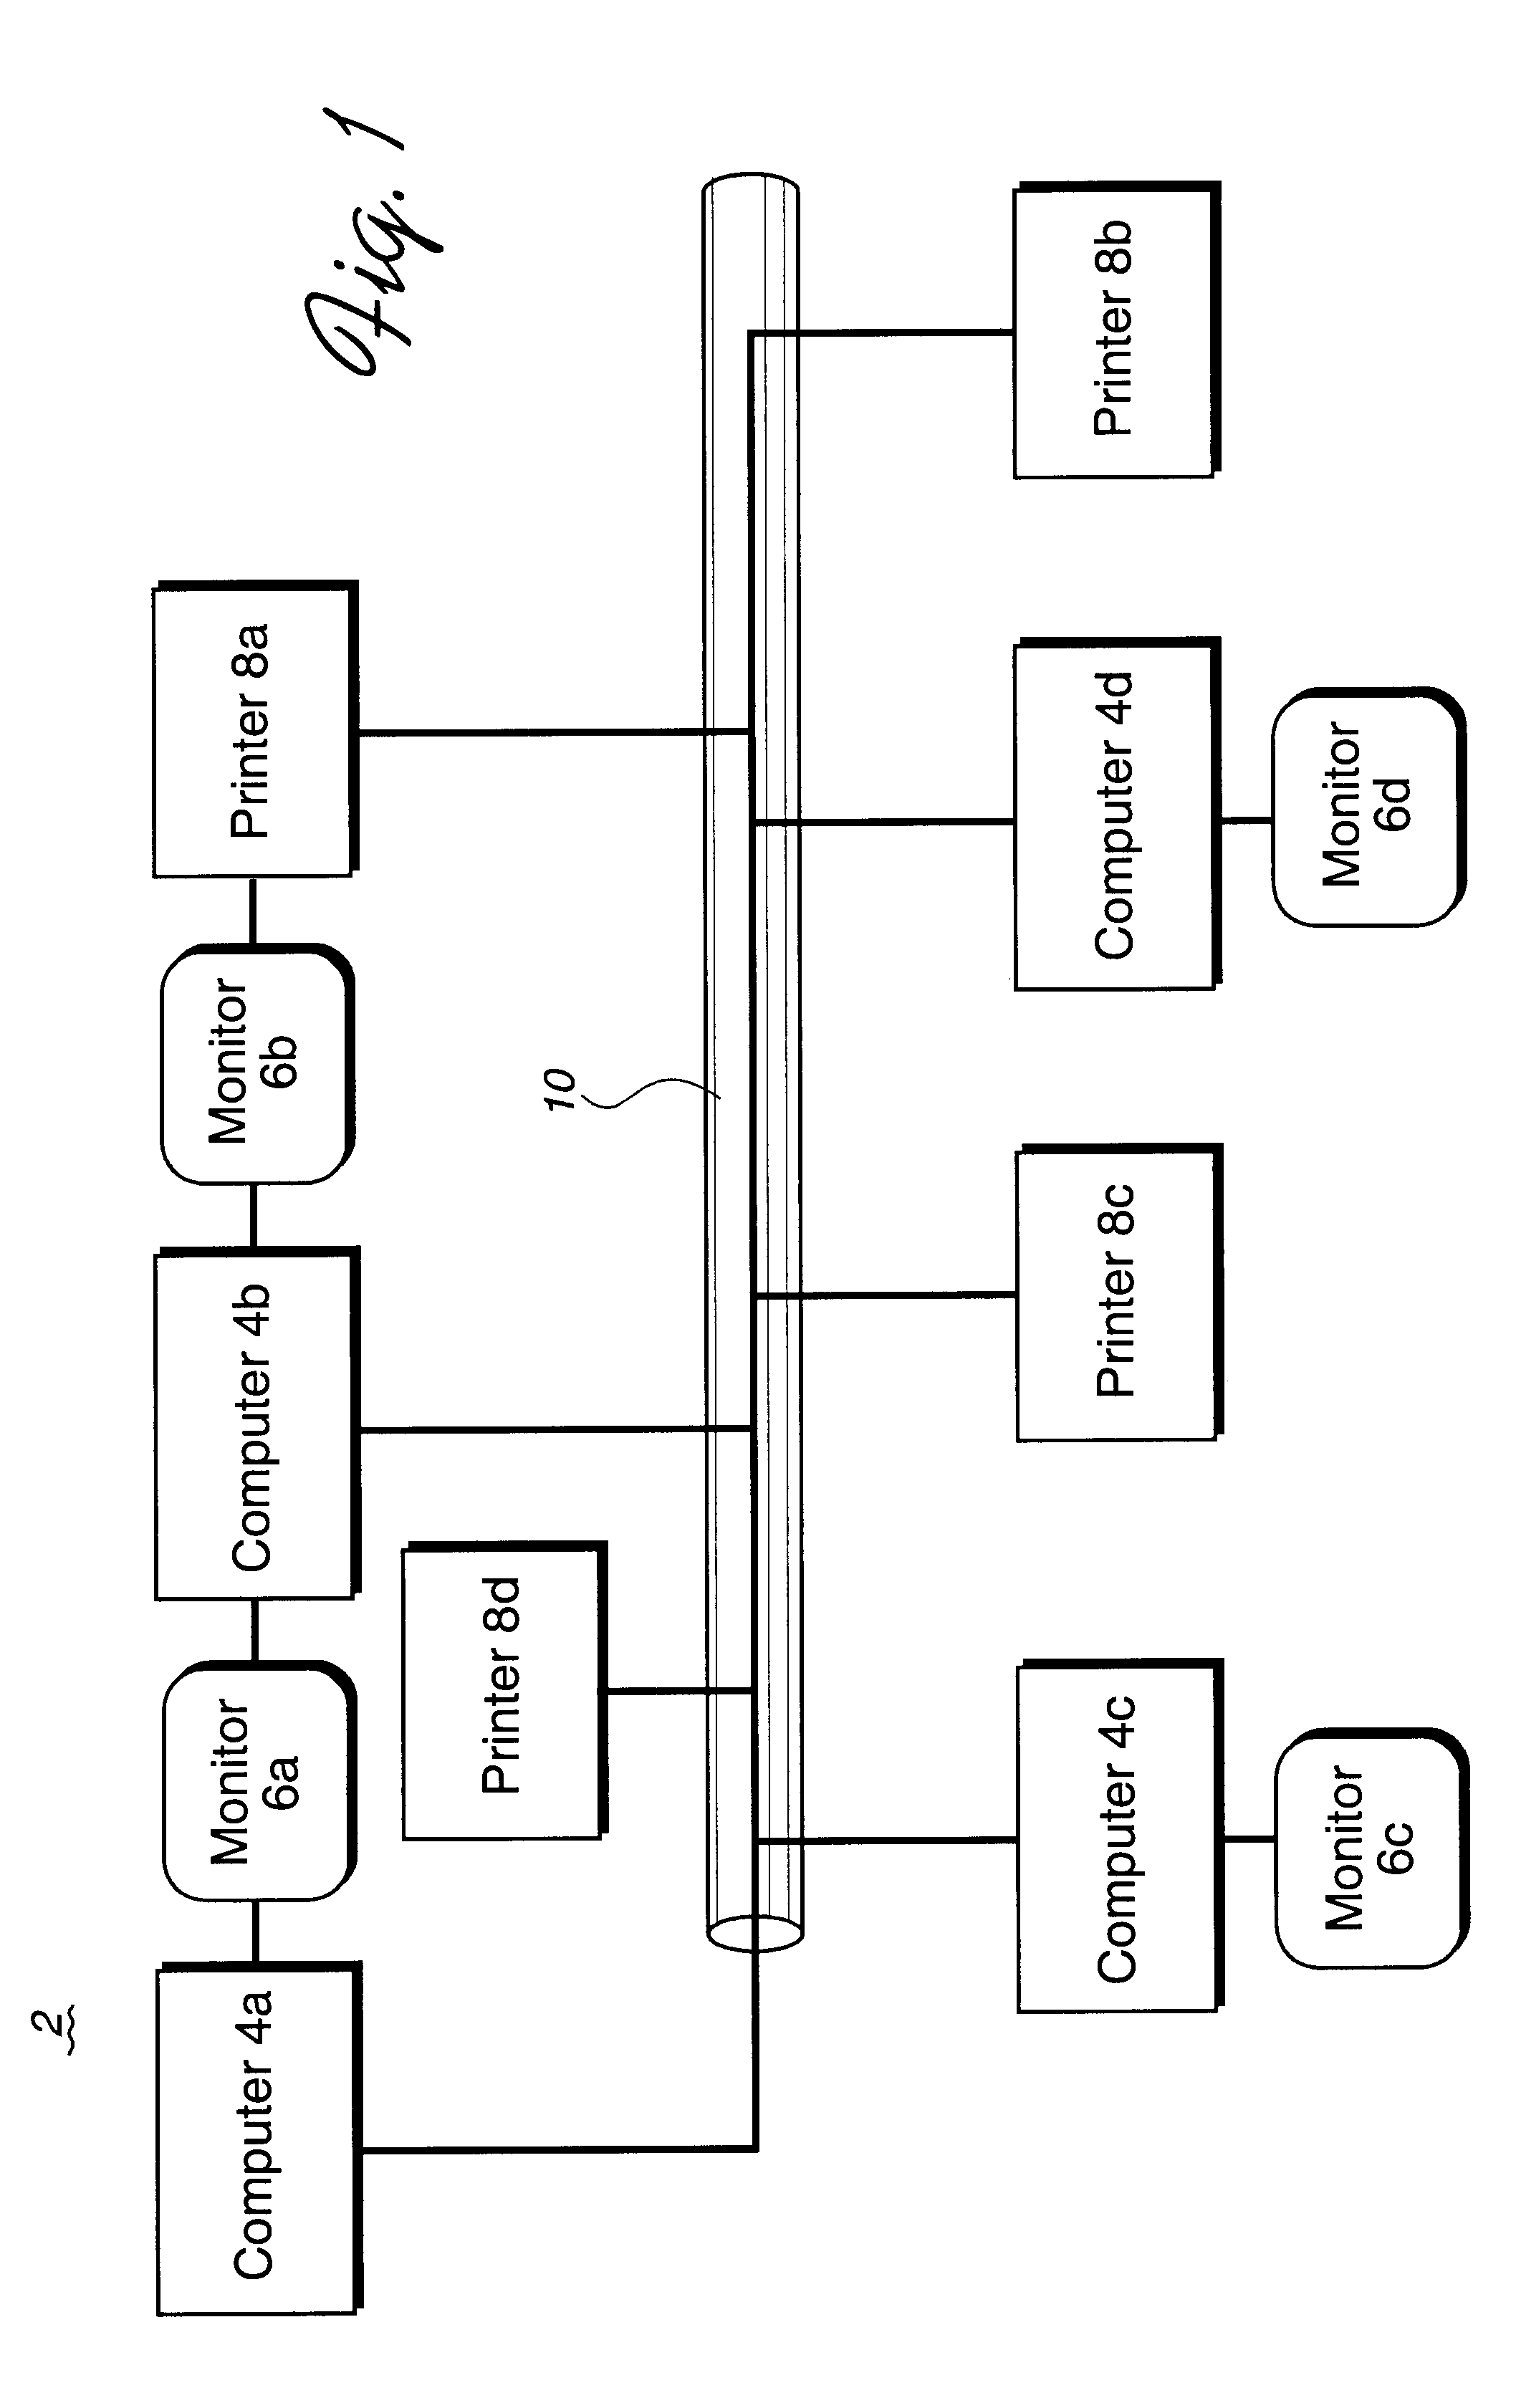 Graphical interface for copying settings from network source device to network target devices without transmitting values not usable for features supported by network target devices